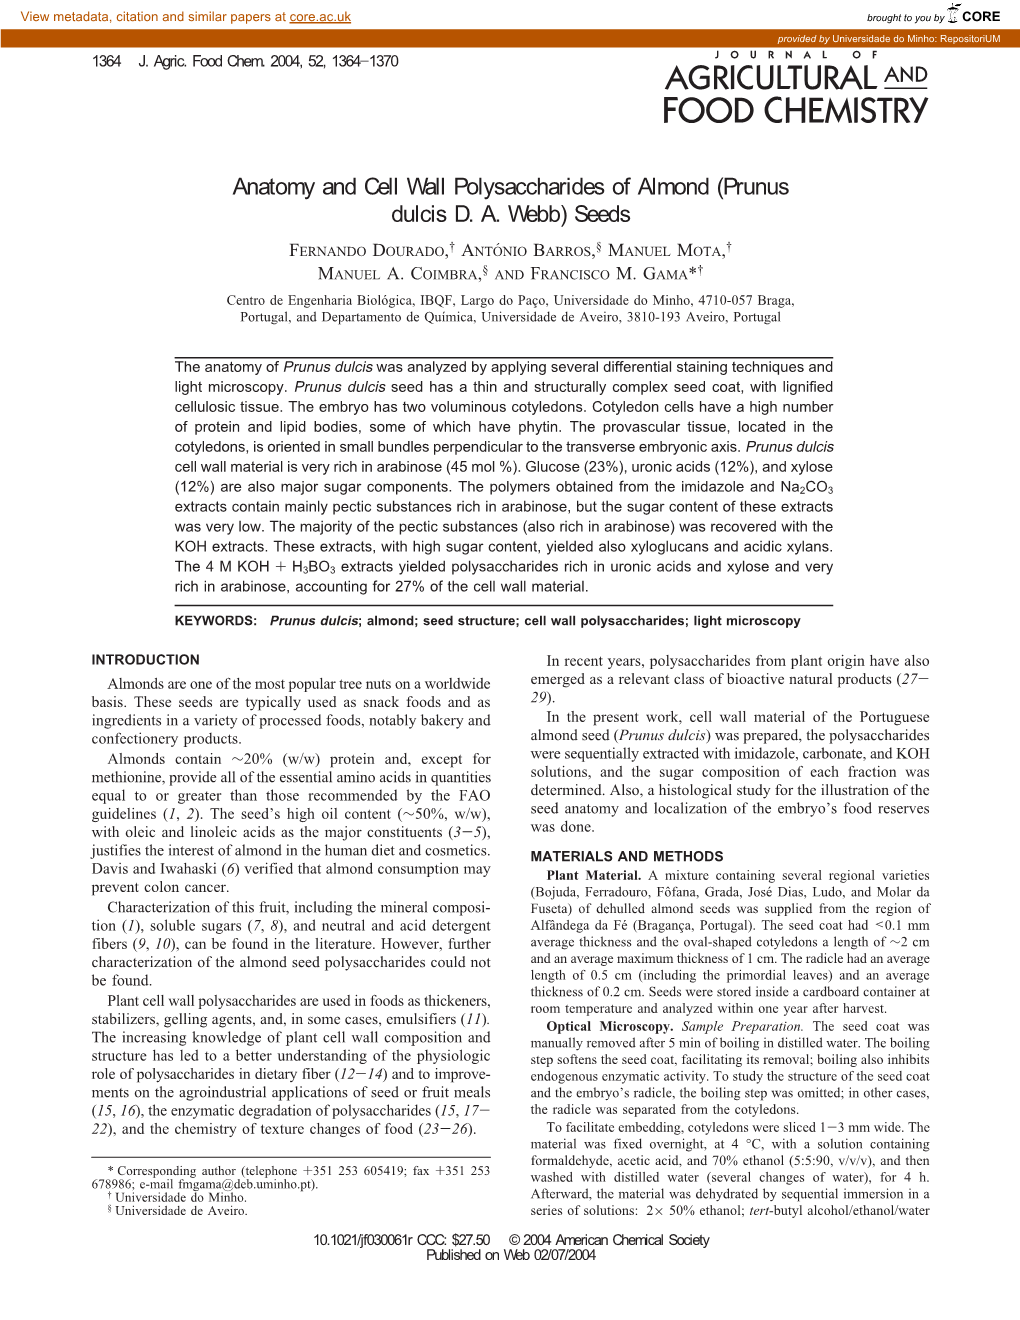 Anatomy and Cell Wall Polysaccharides of Almond (Prunus Dulcis D